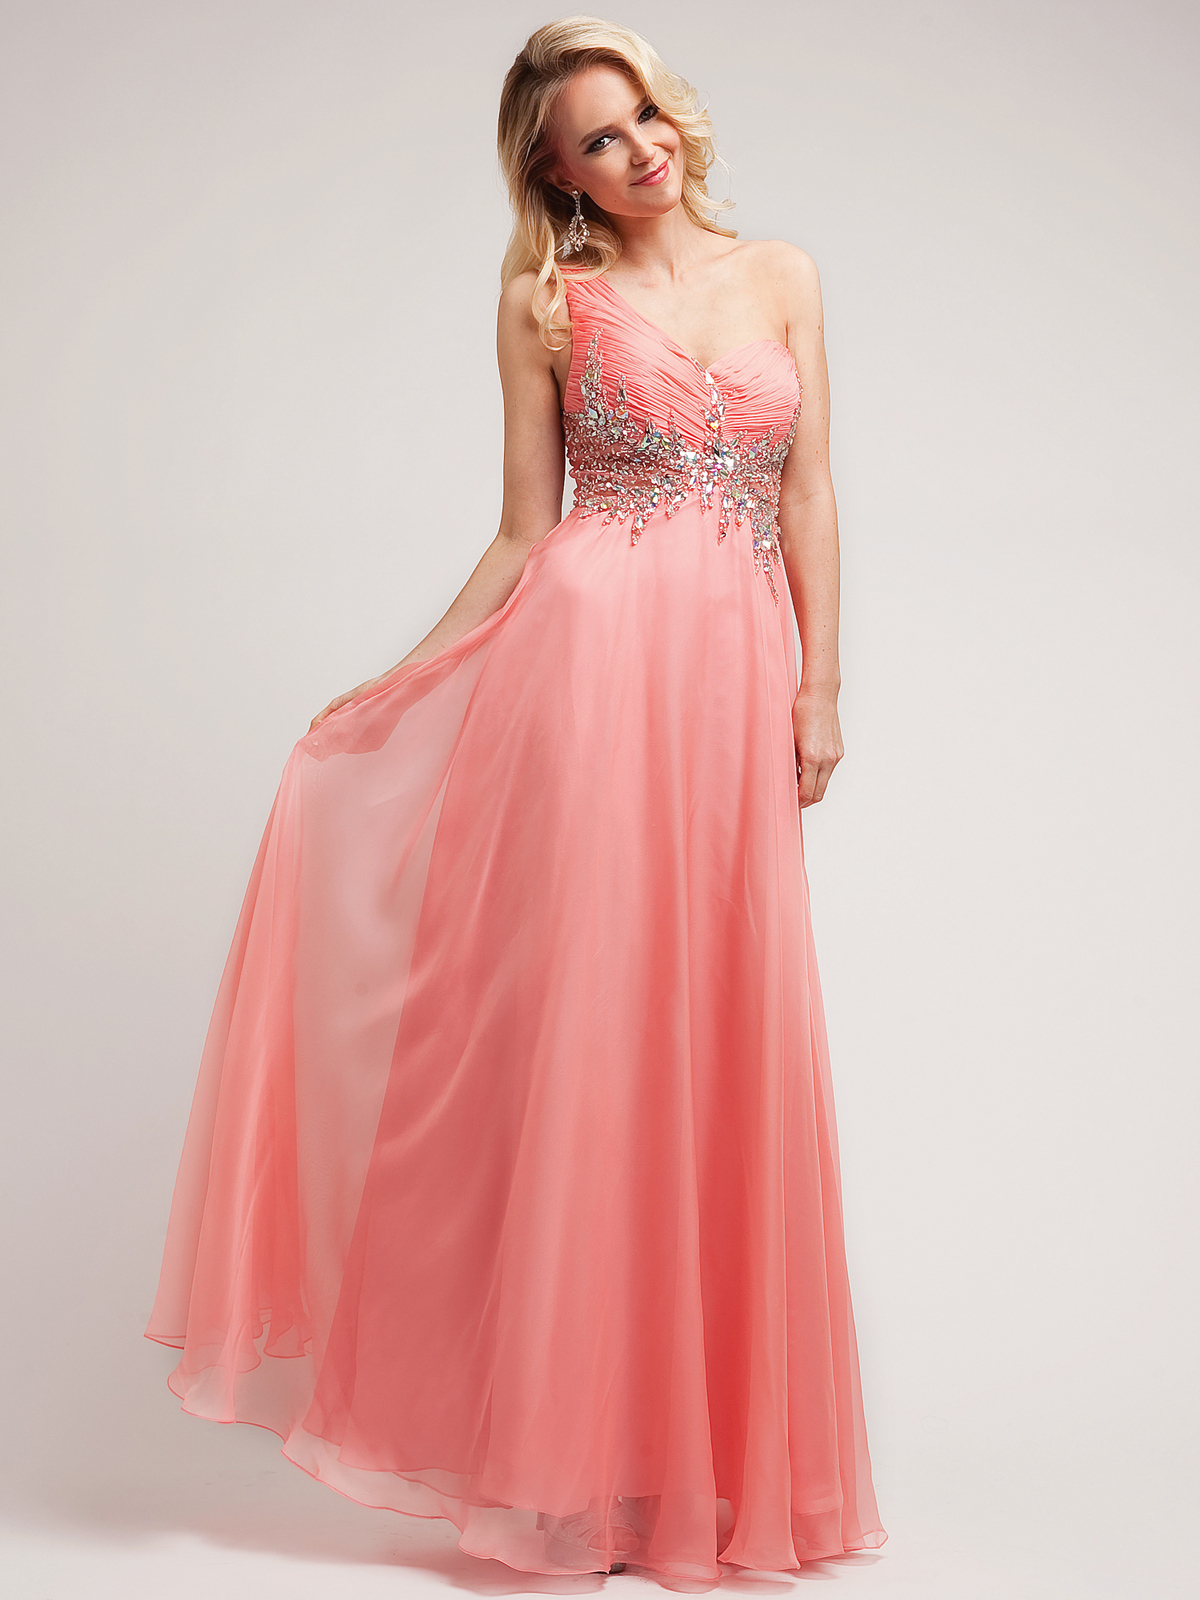 coral special occasion dresses